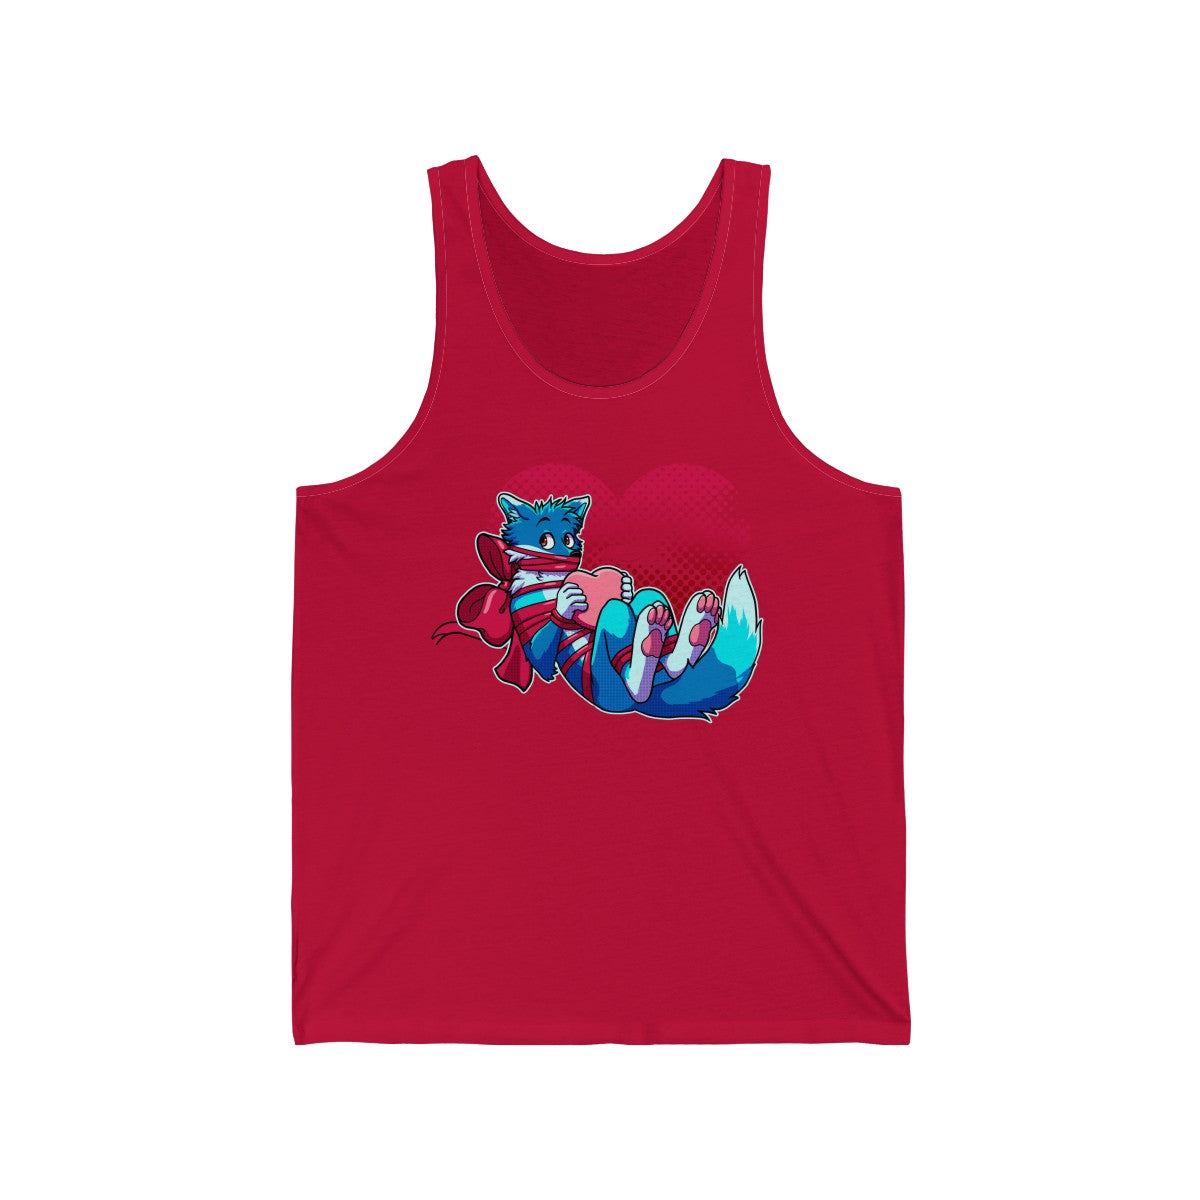 Wrapped Heart - Tank Top Tank Top Artworktee Red XS 